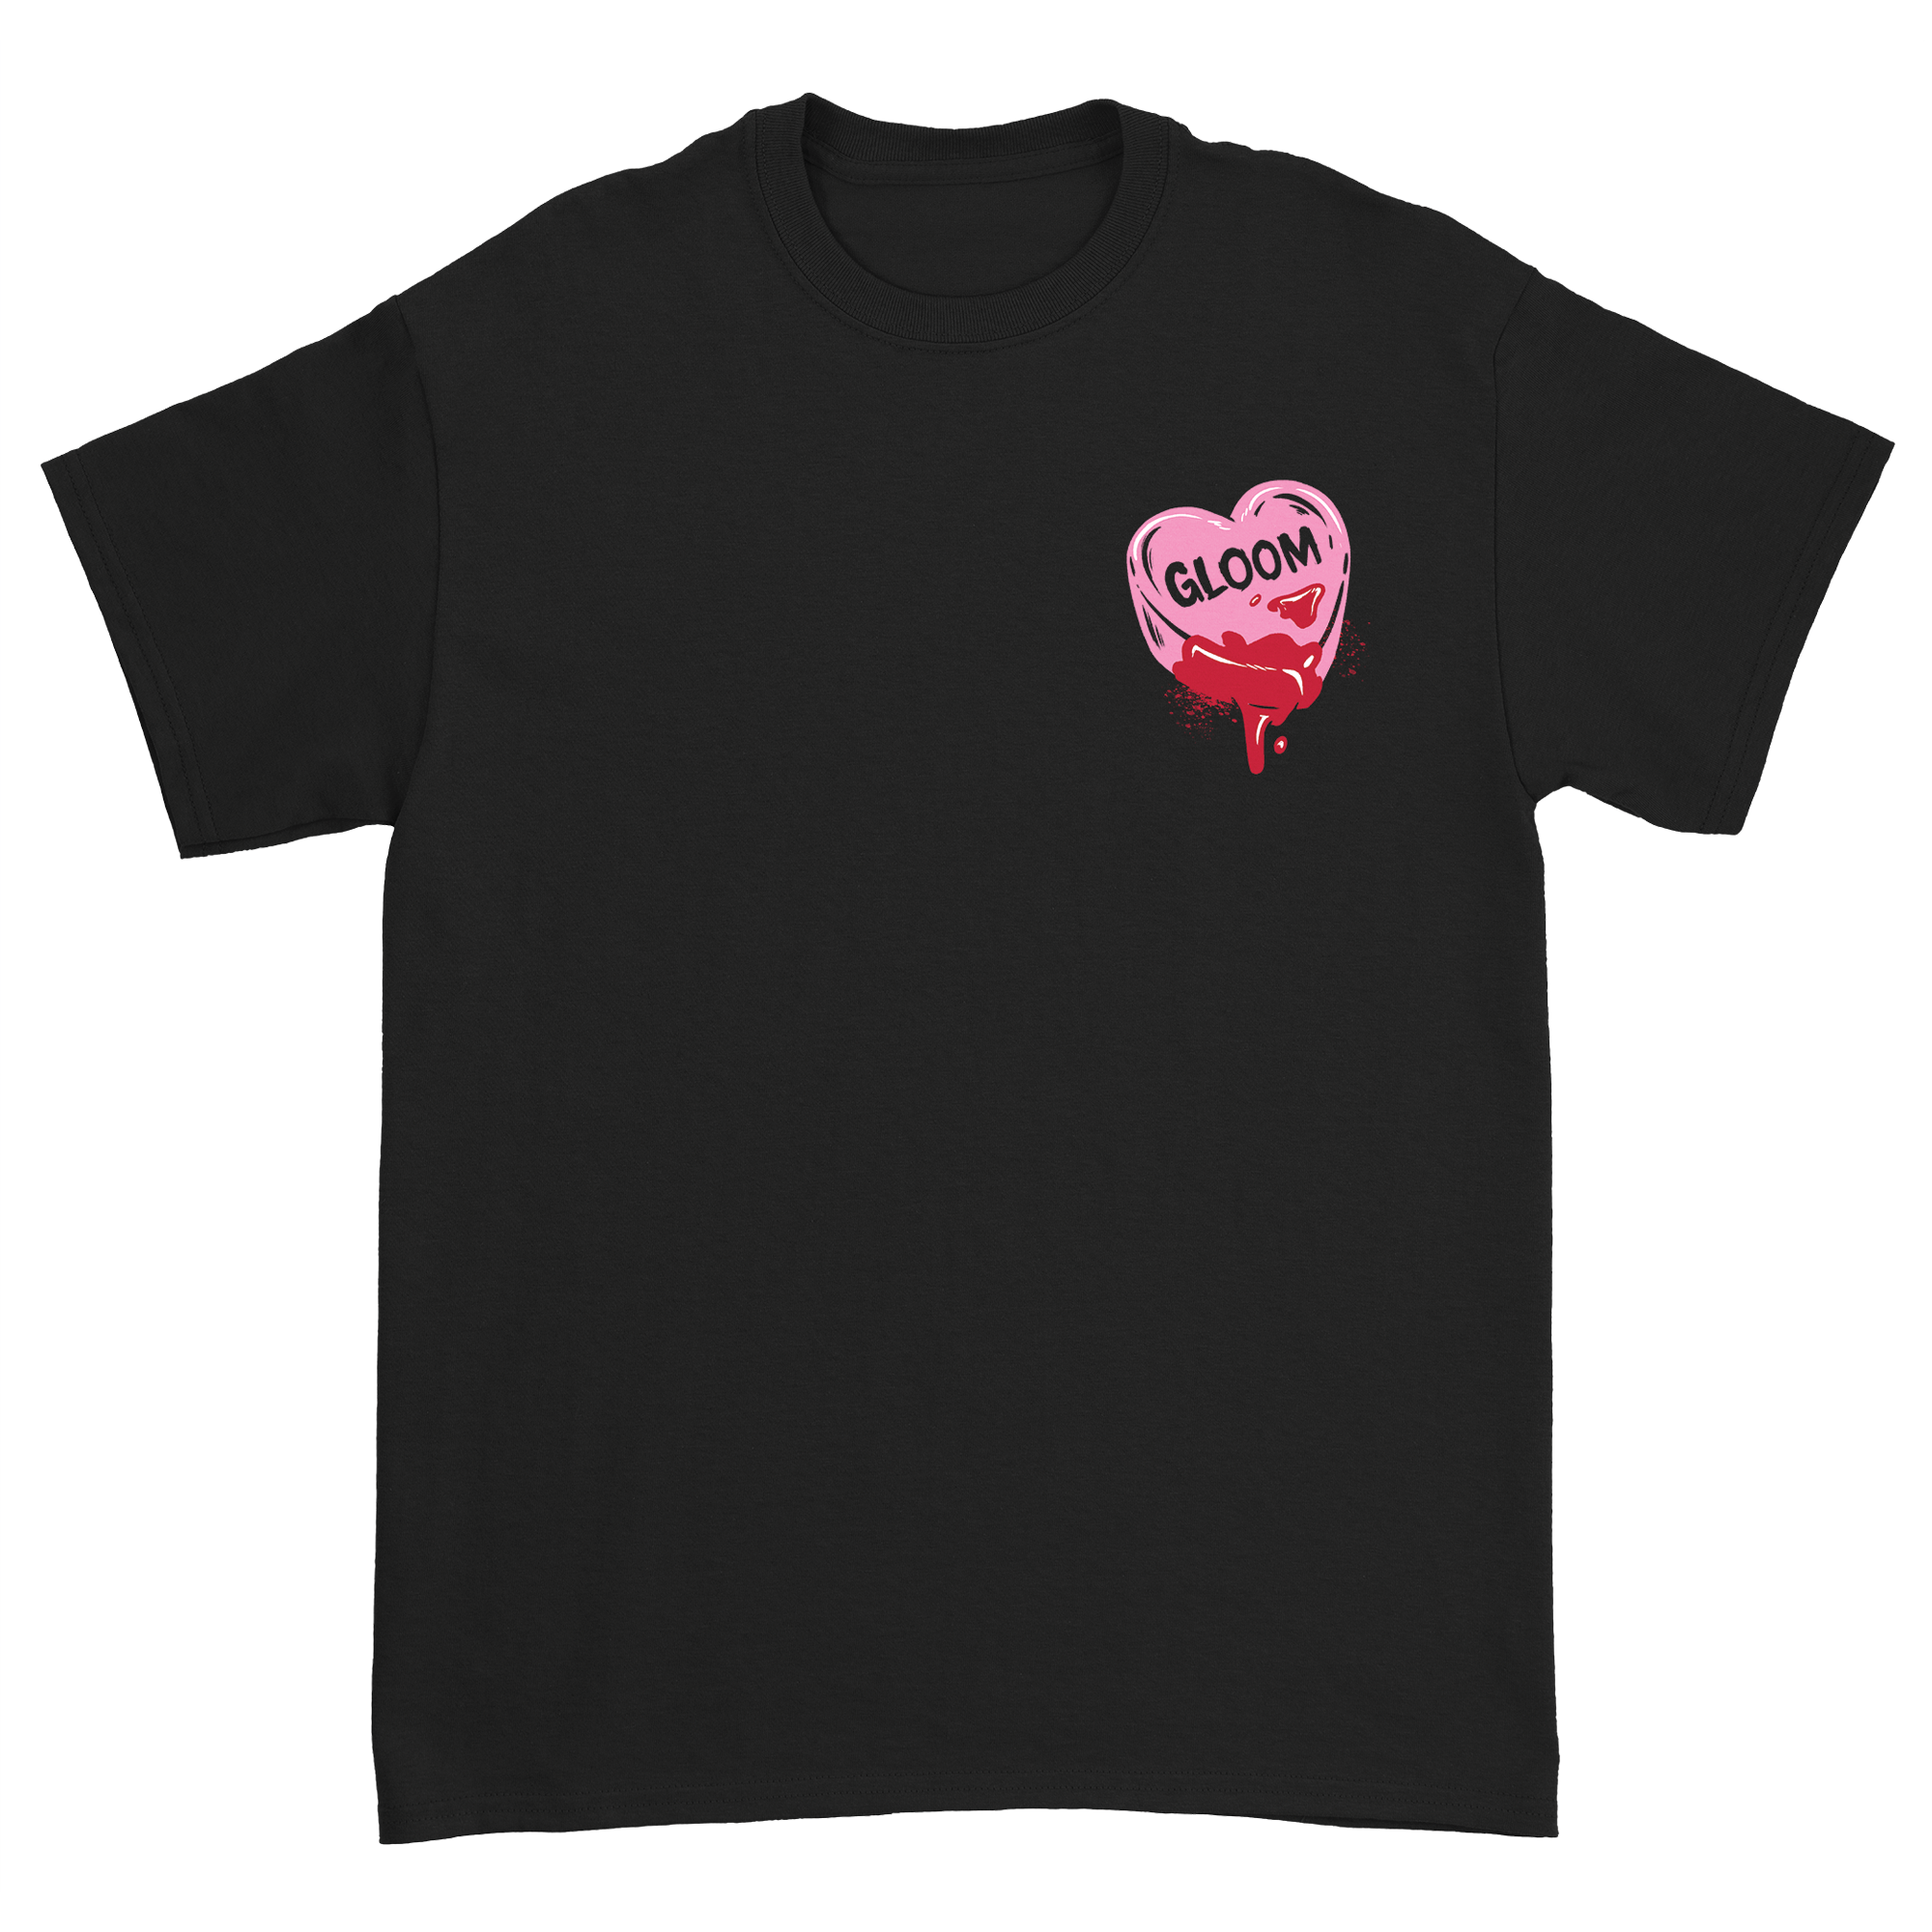 The Gloom in the Corner - Candy T-Shirt